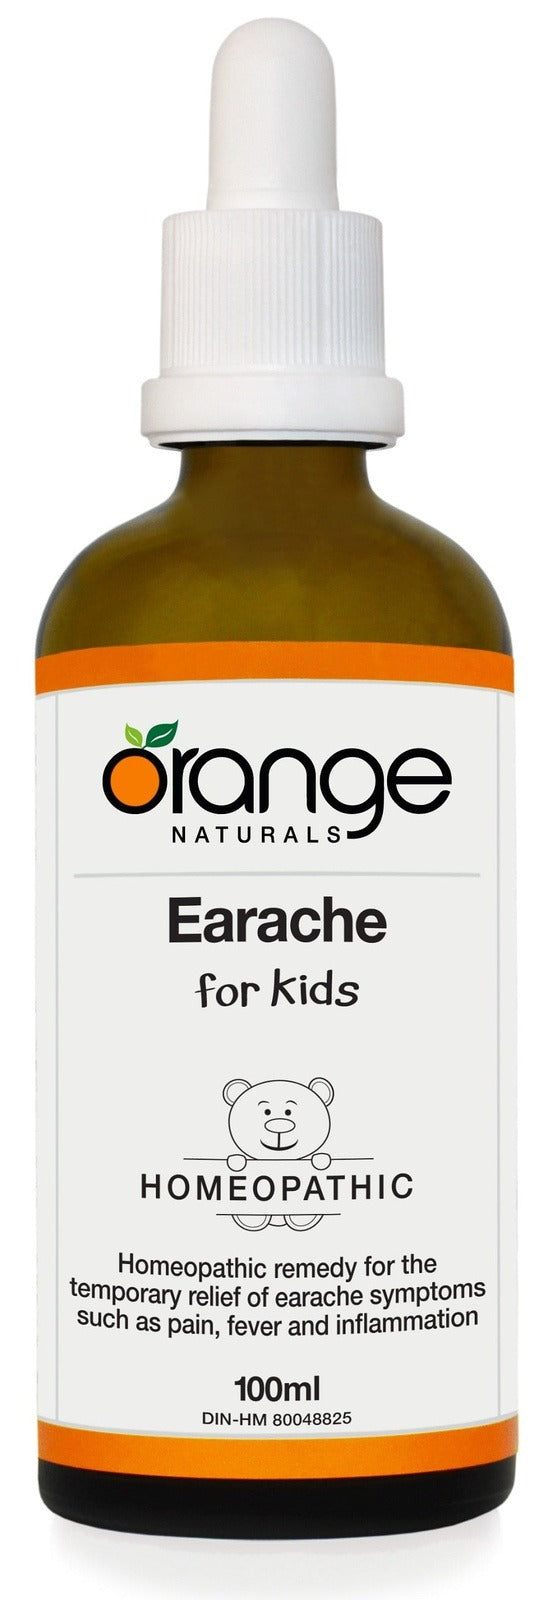 Orange Naturals Homeopathic Earache for Kids 100 mL Image 1